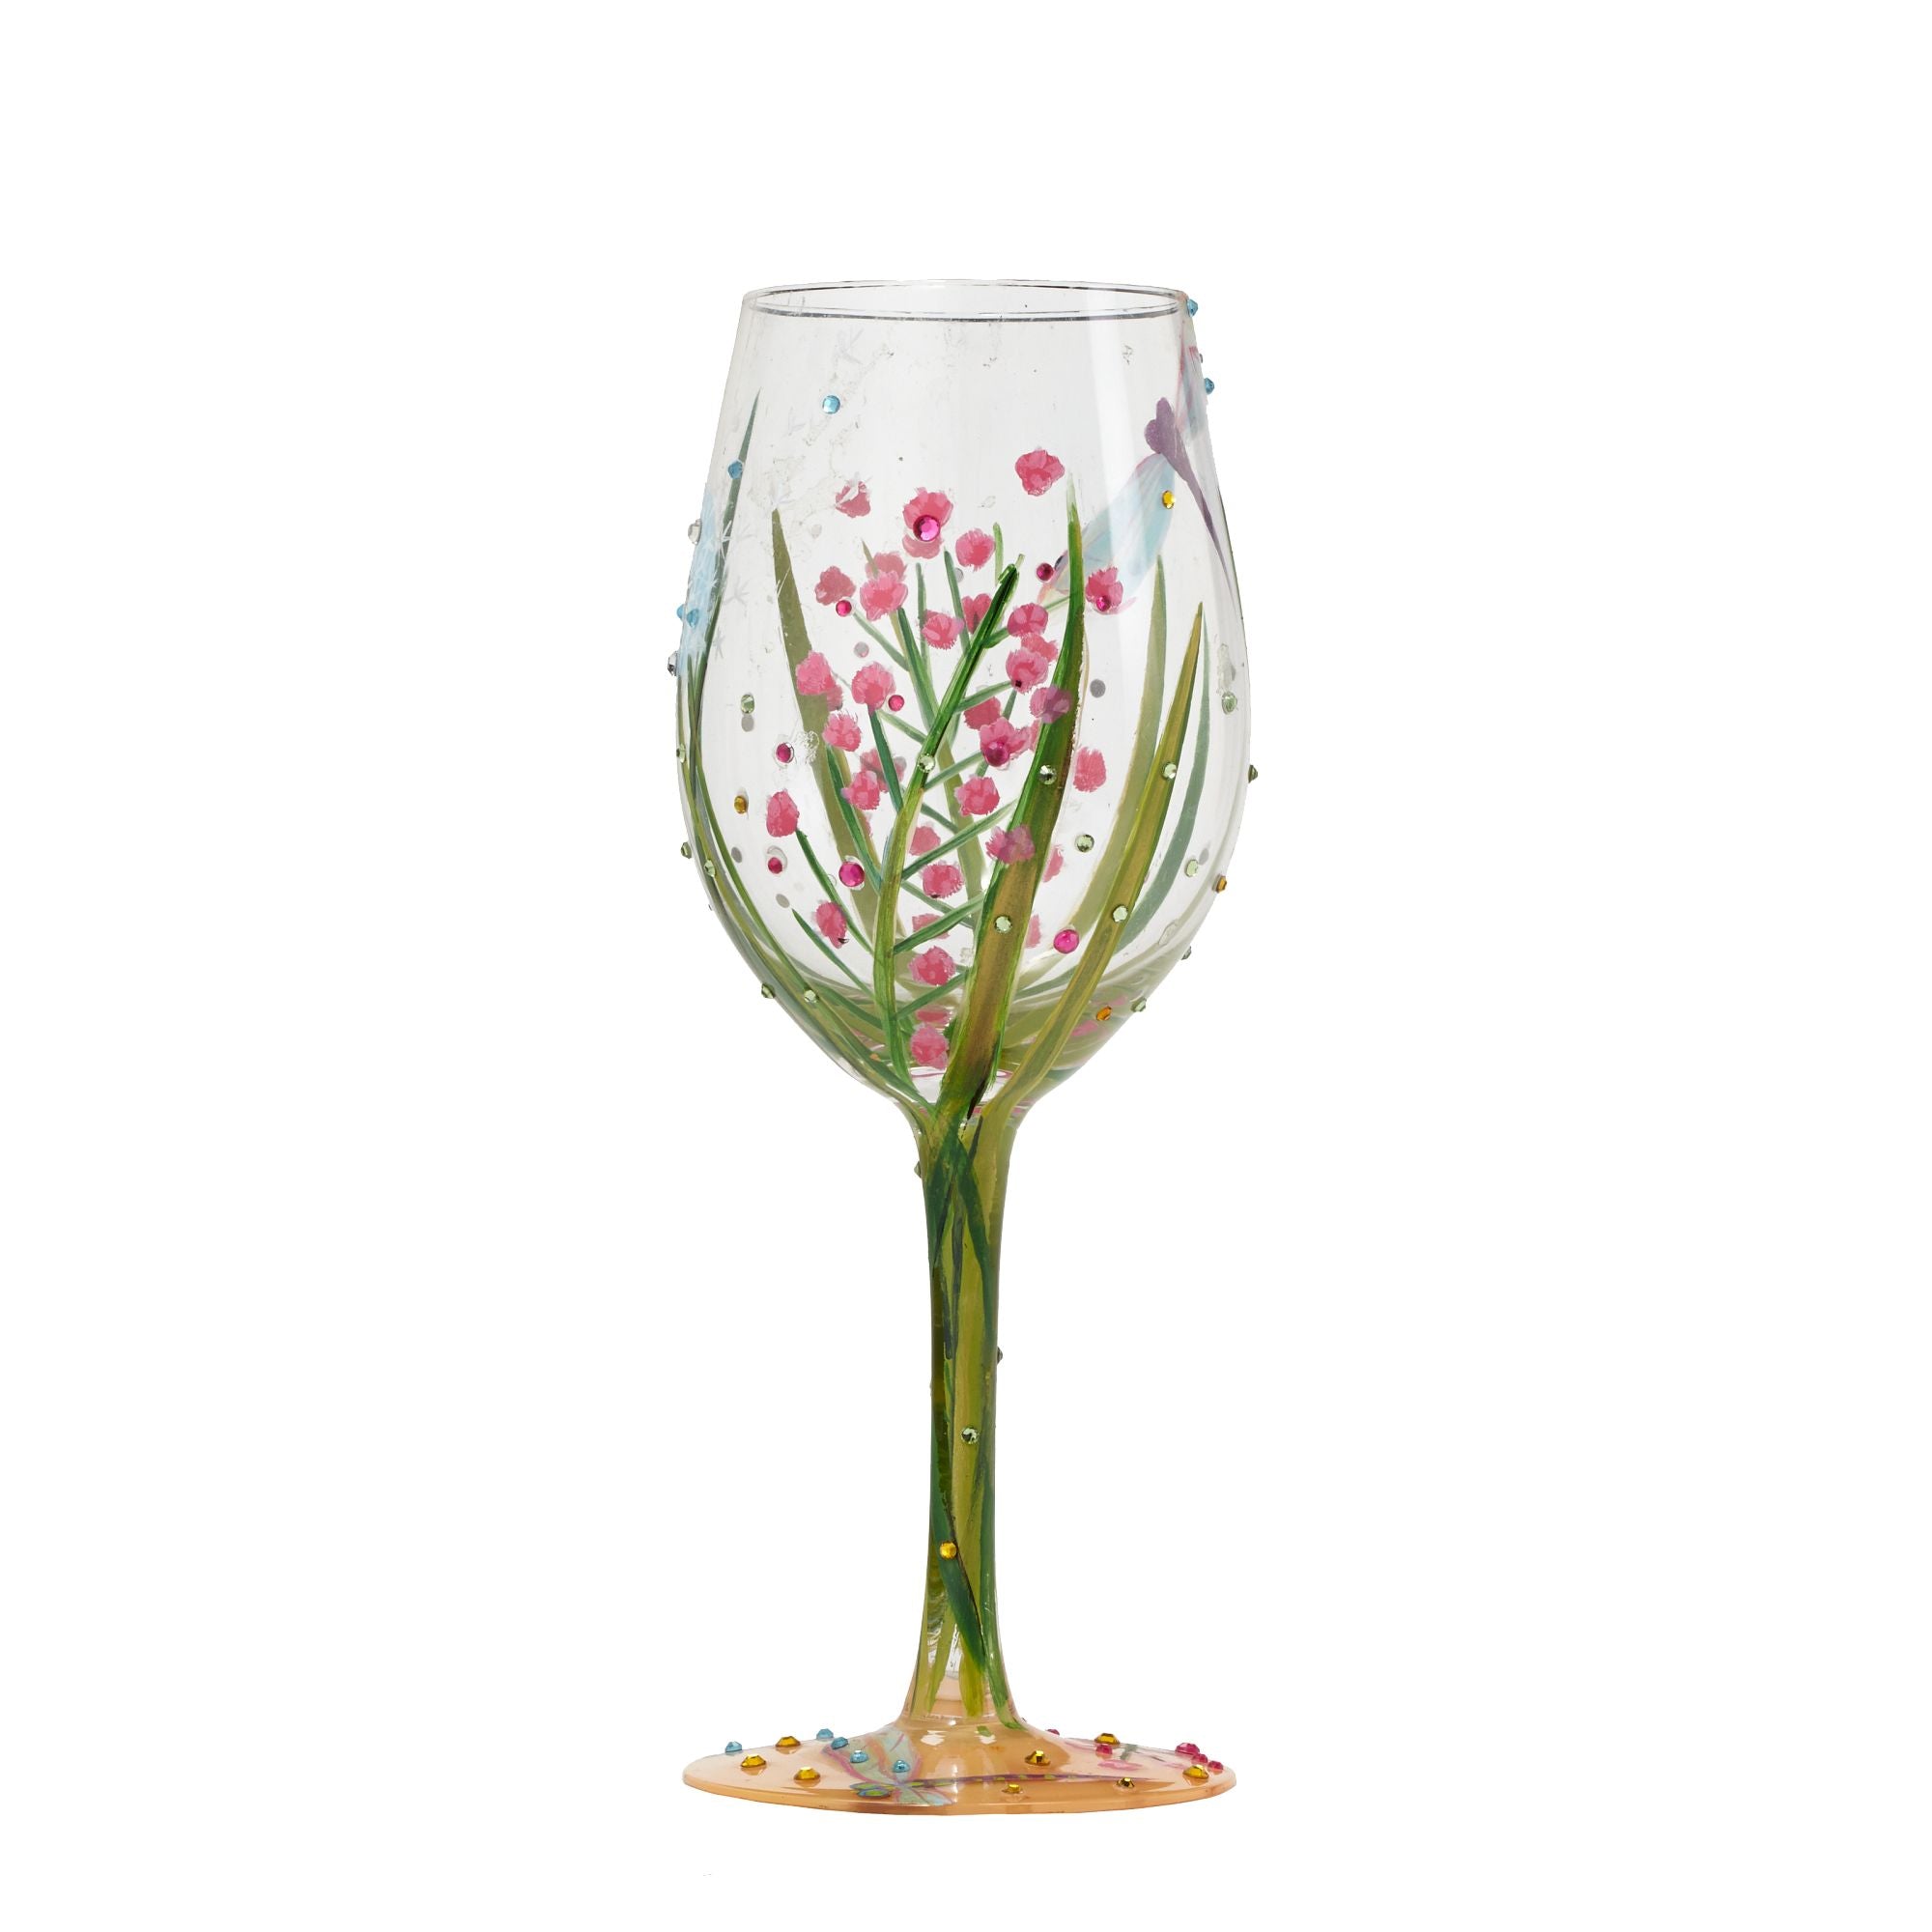 Wine Glass with Decorated Stem - Wine Is Life Store